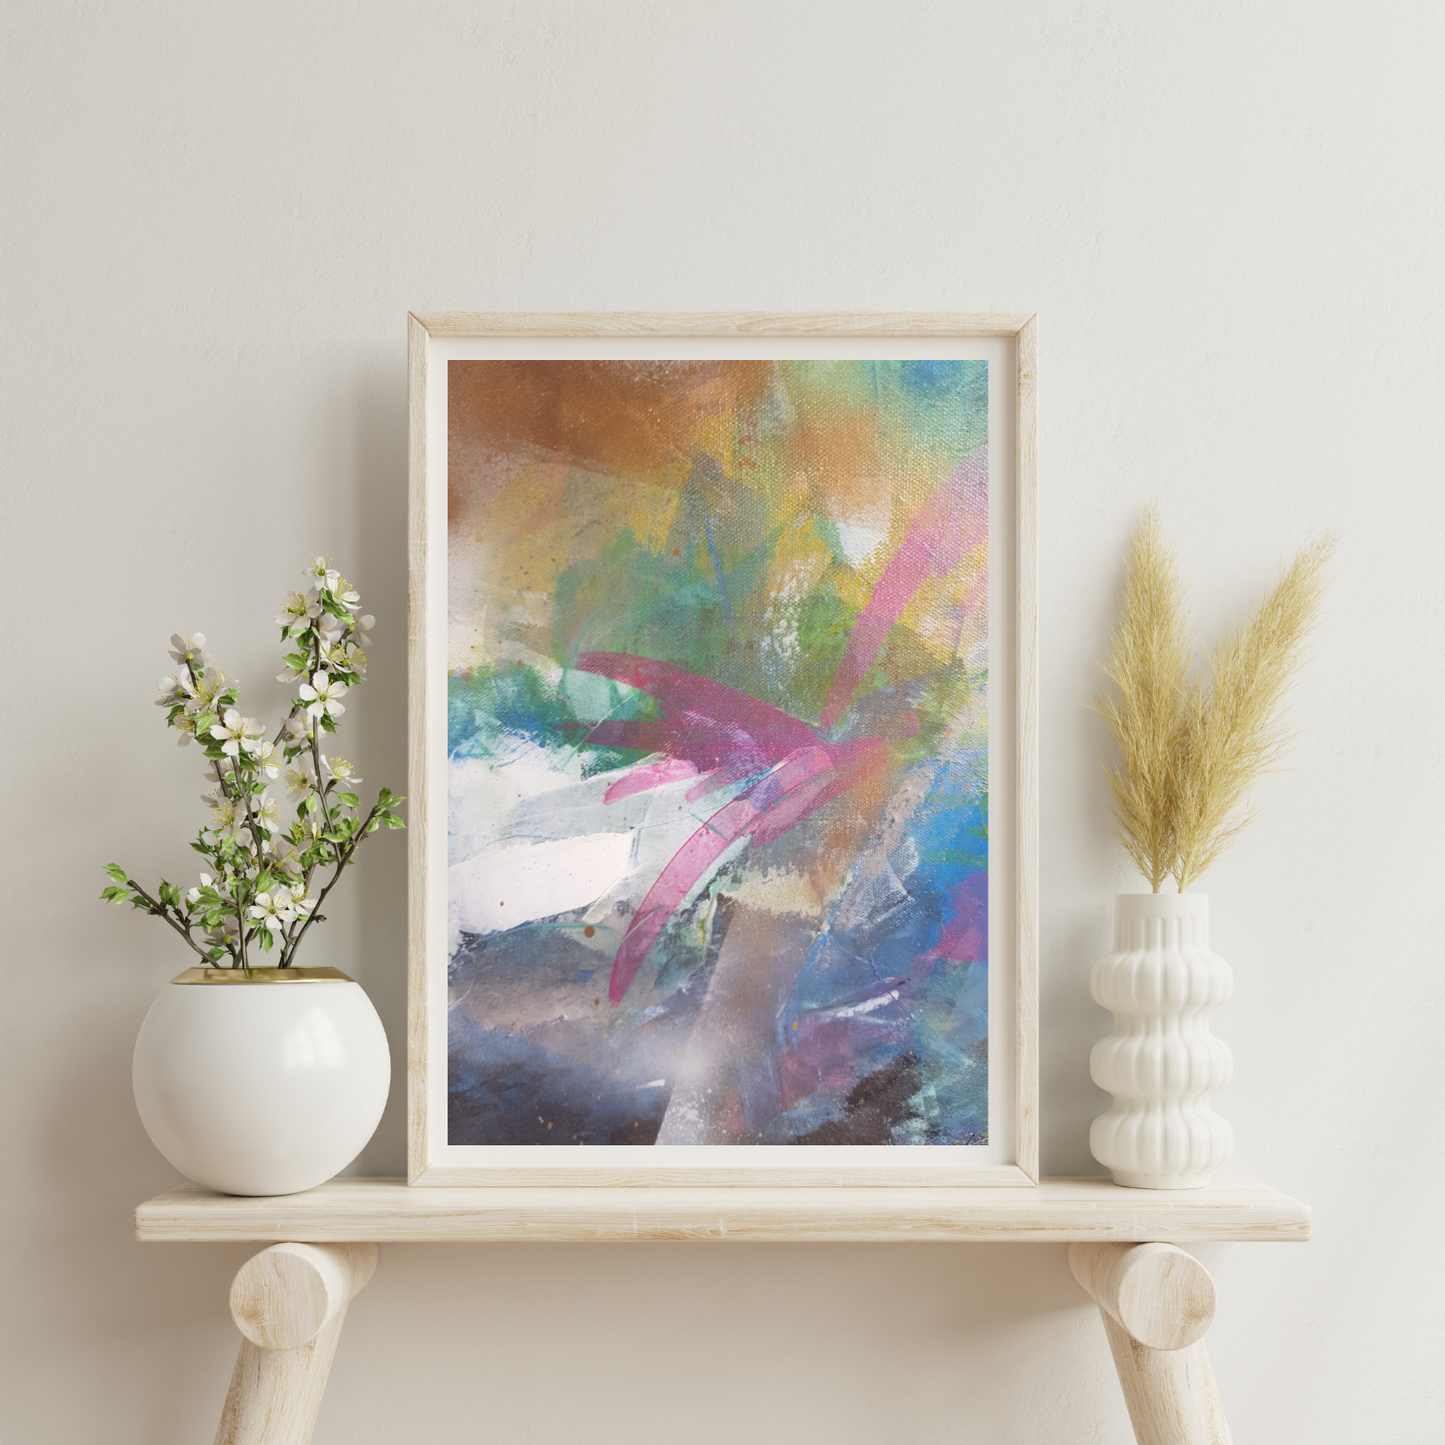 Lively Skies Art Print - Art for your home